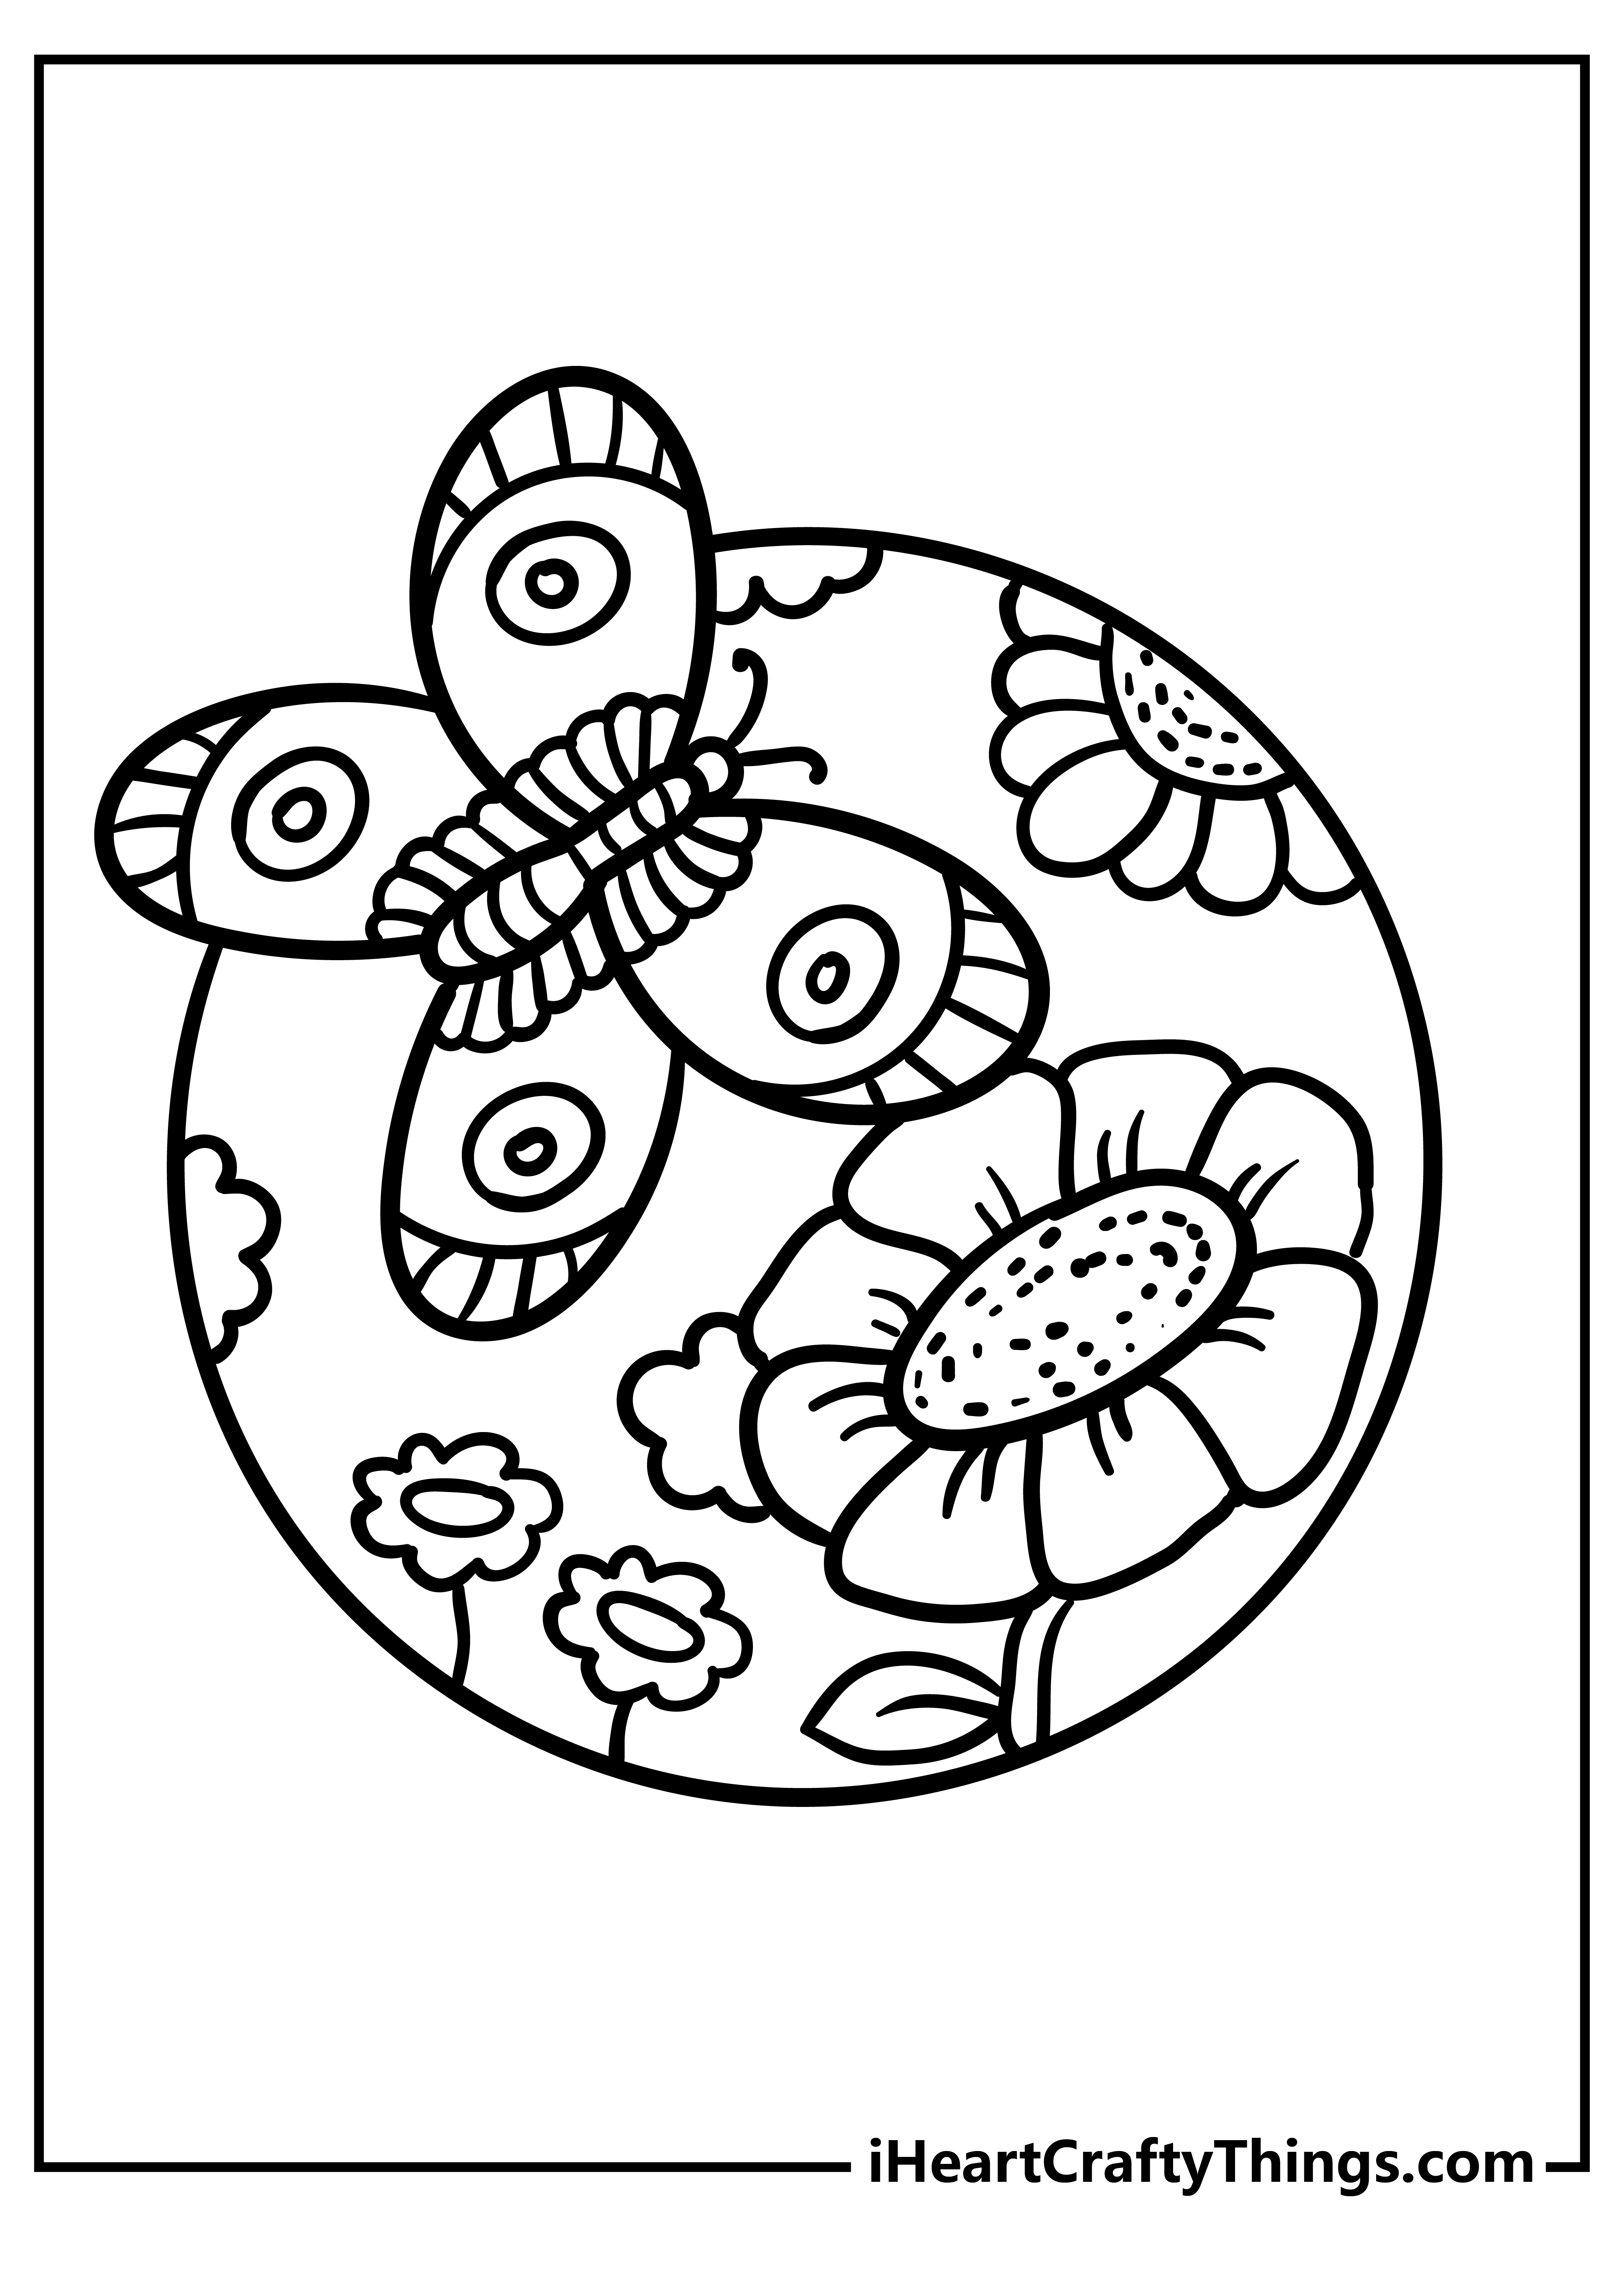 12 Free Printable Cute Coloring Pages